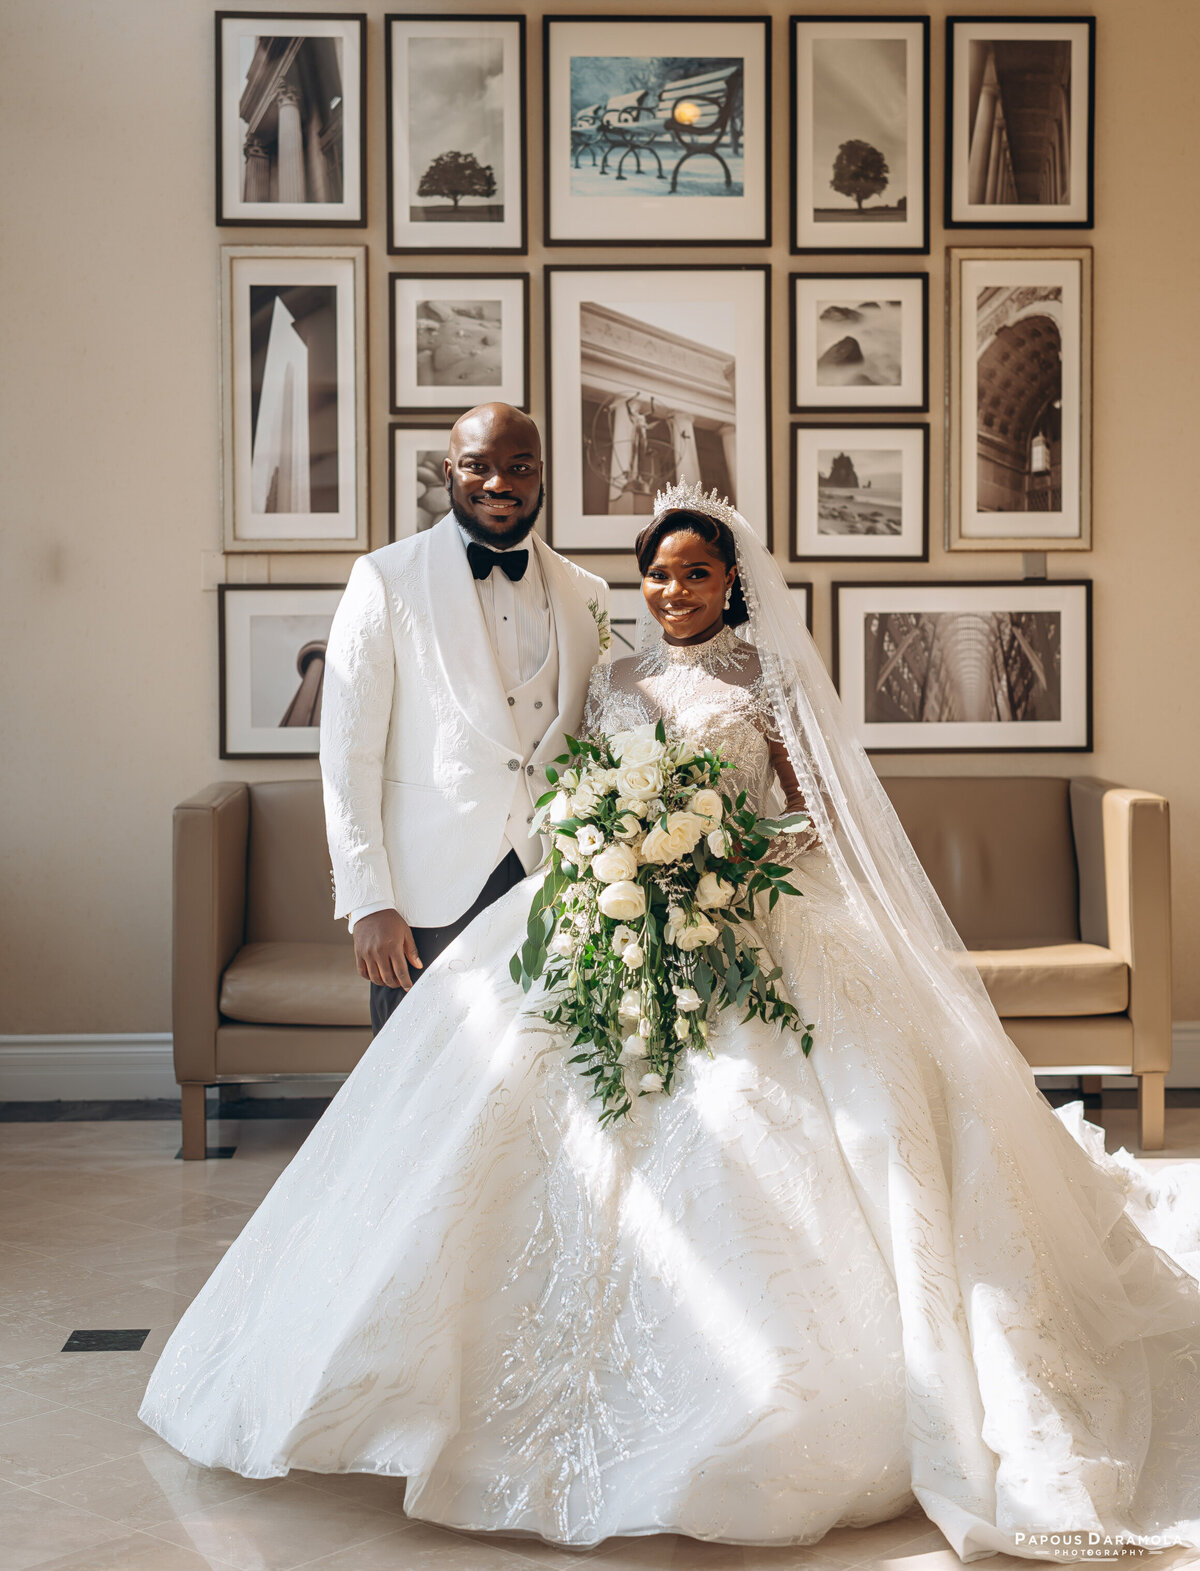 Abigail and Abije Oruka Events Papouse photographer Wedding event planners Toronto planner African Nigerian Eyitayo Dada Dara Ayoola outdoor ceremony floral princess ballgown rolls royce groom suit potraits  paradise banquet hall vaughn 147